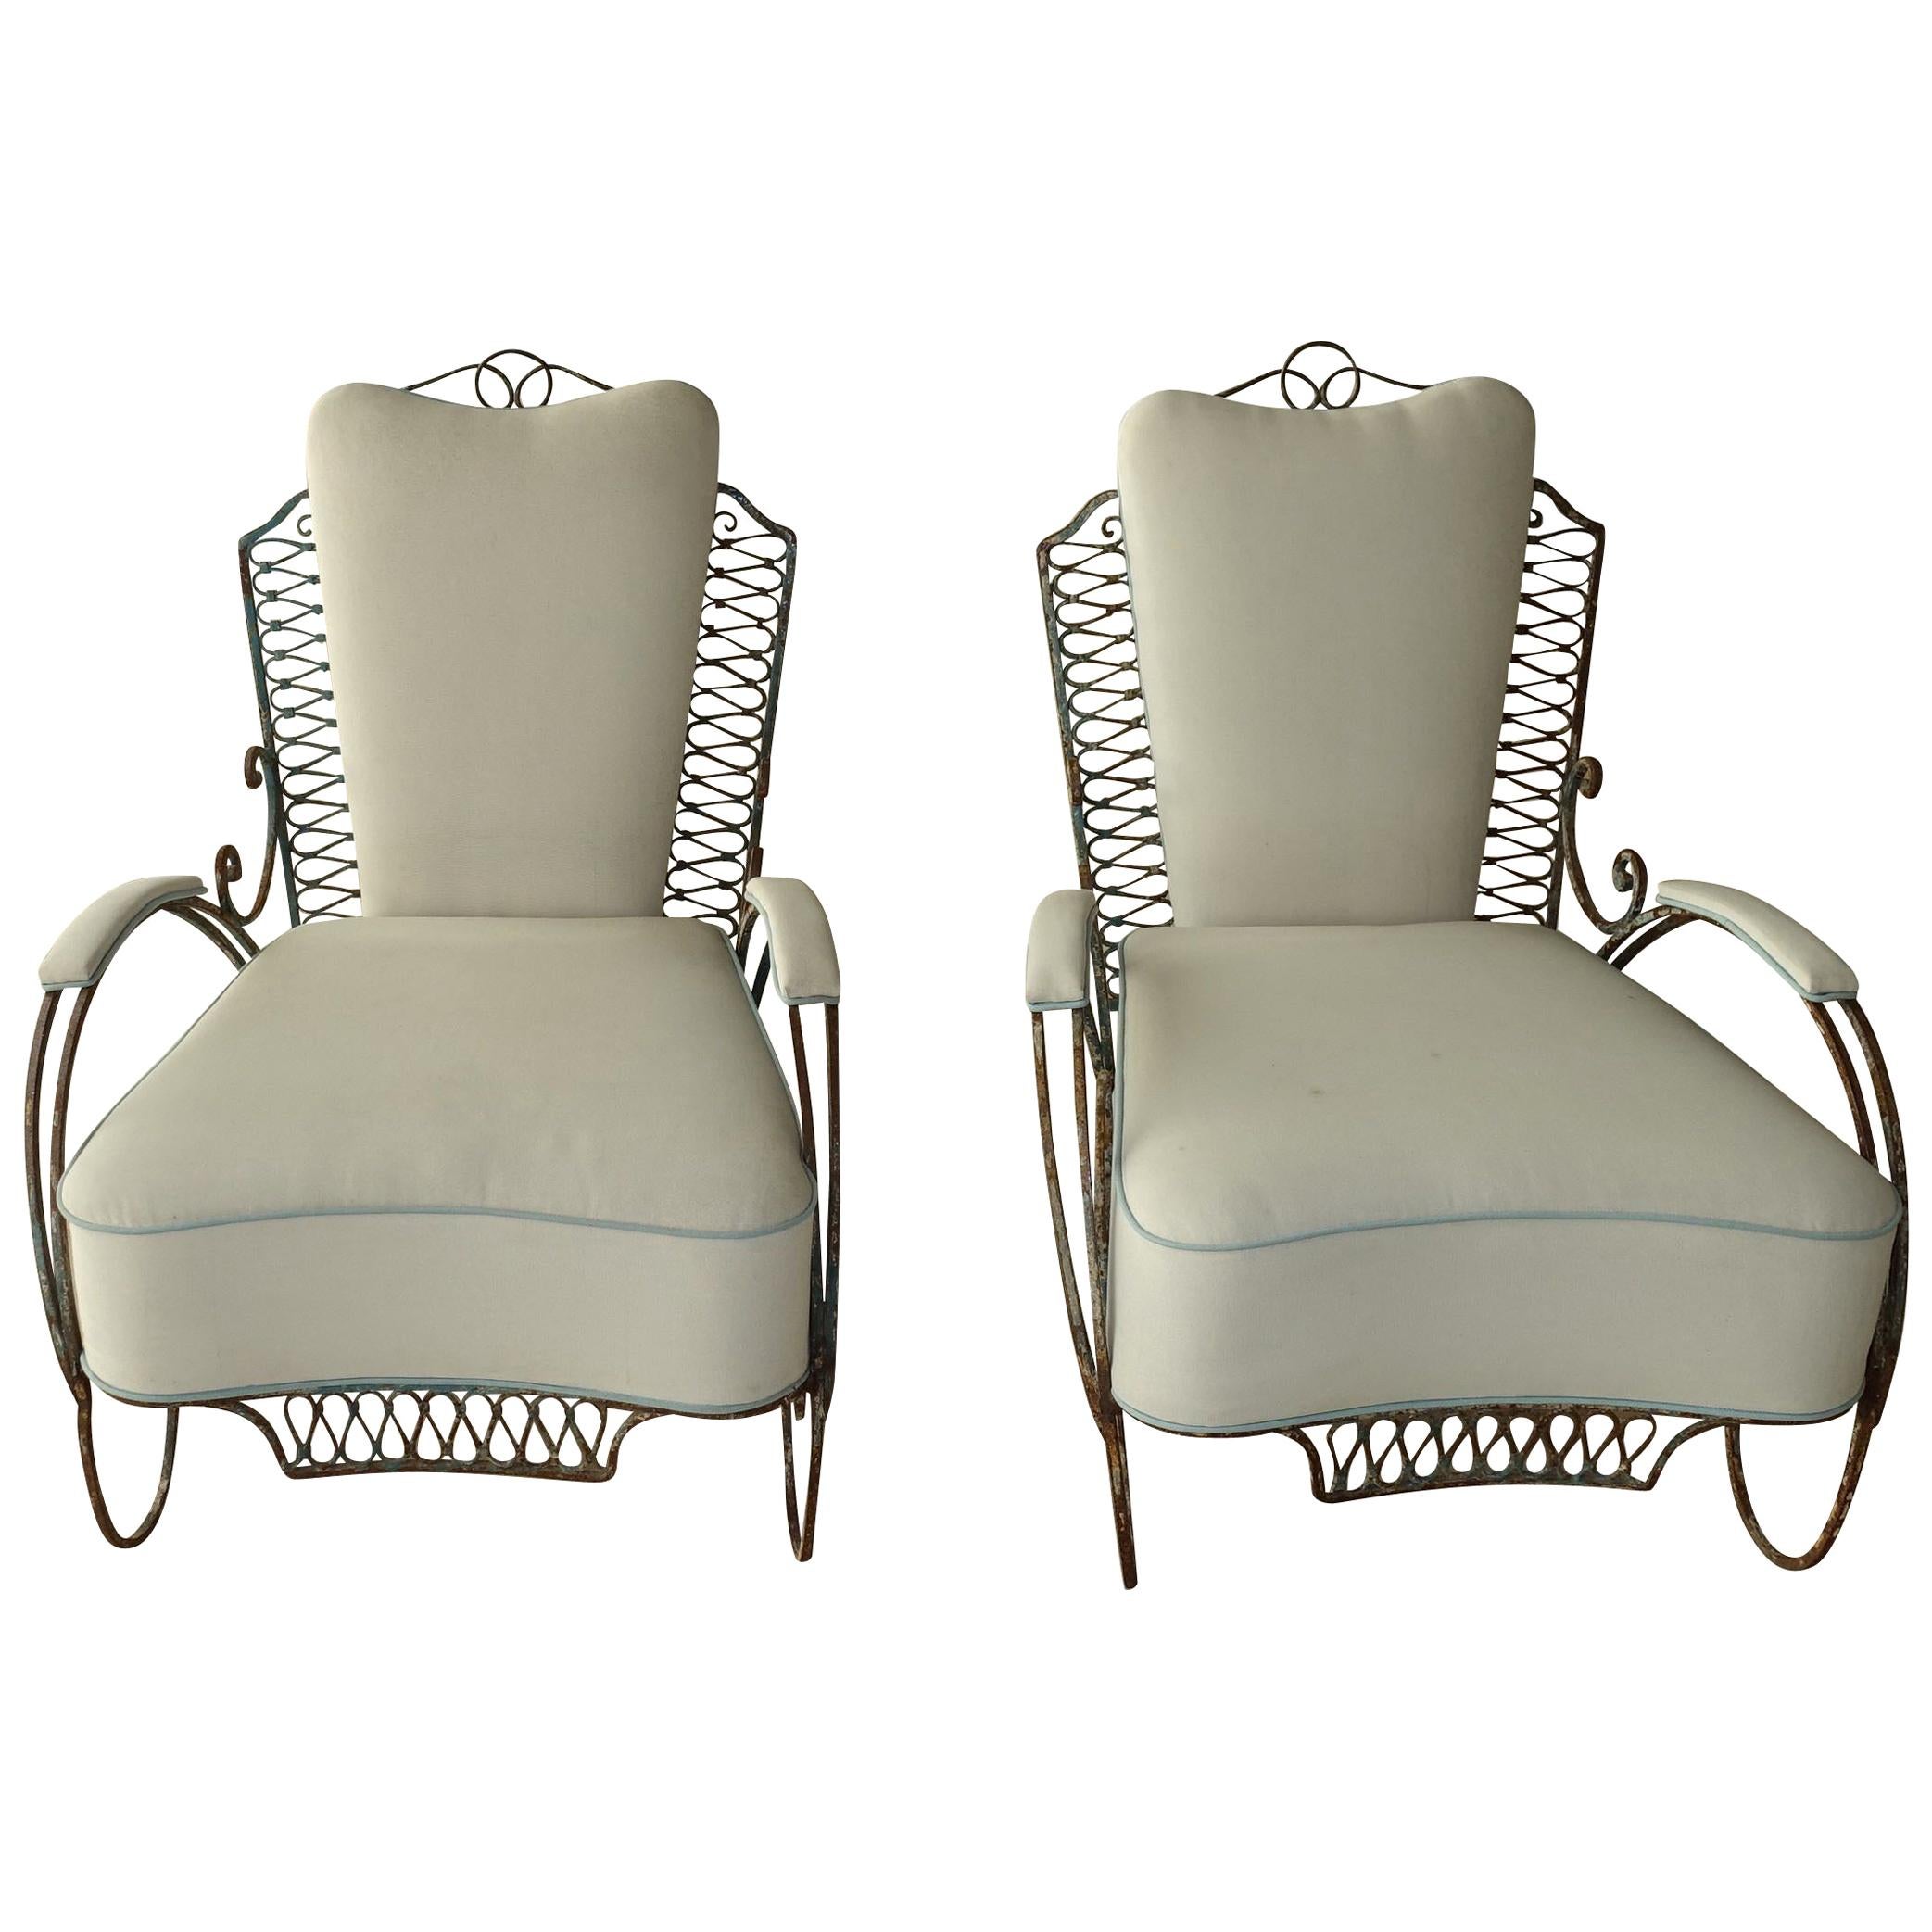 1940s French wrought iron settee and matching pair of chairs with very decorative iron work.
These pieces have a very beautiful natural weathered patina.
Upholstered in off-white outdoor fabric with pale turquoise piping. Foam filling.
Settee